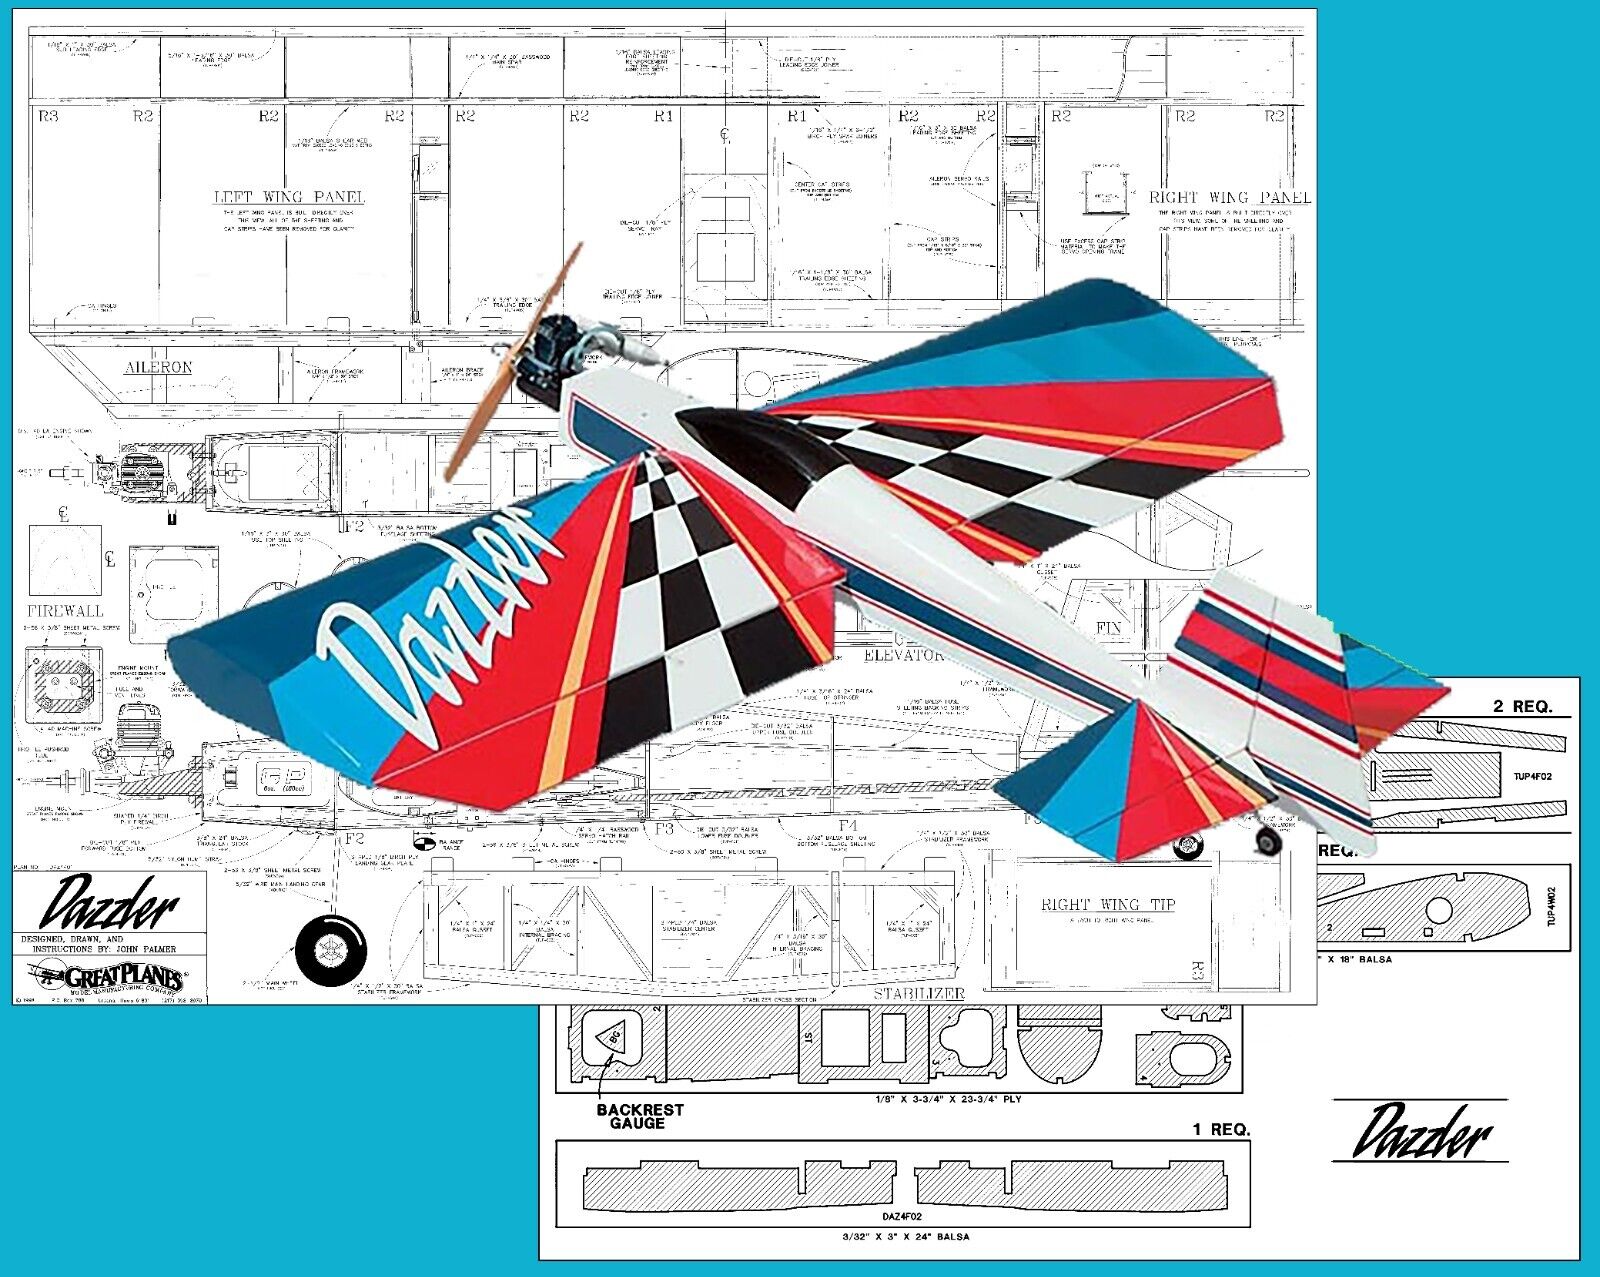 Model Airplane Plans (RC): Great Planes DAZZLER 48" Wingspan for .32-.40 Engine